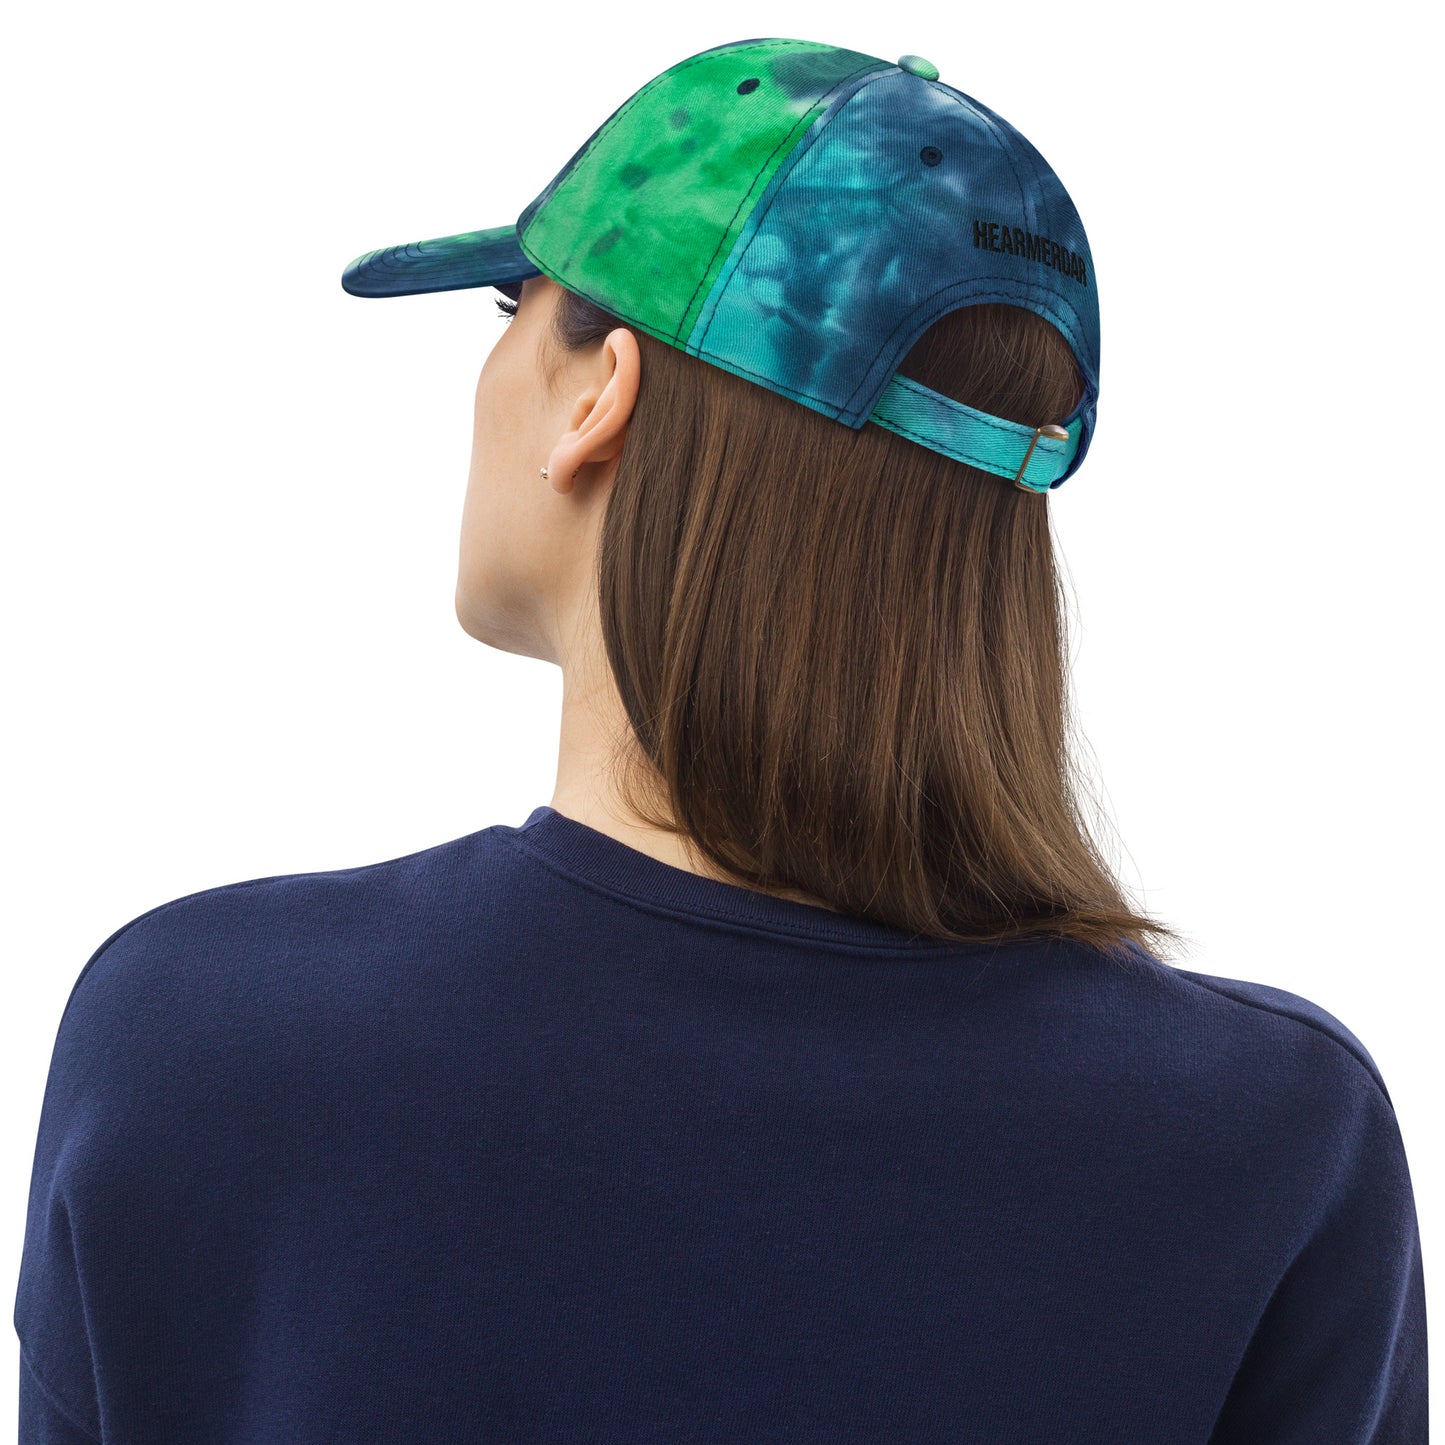 Abolish Absent Fathers Embroidered Unisex Tie Dye Cap